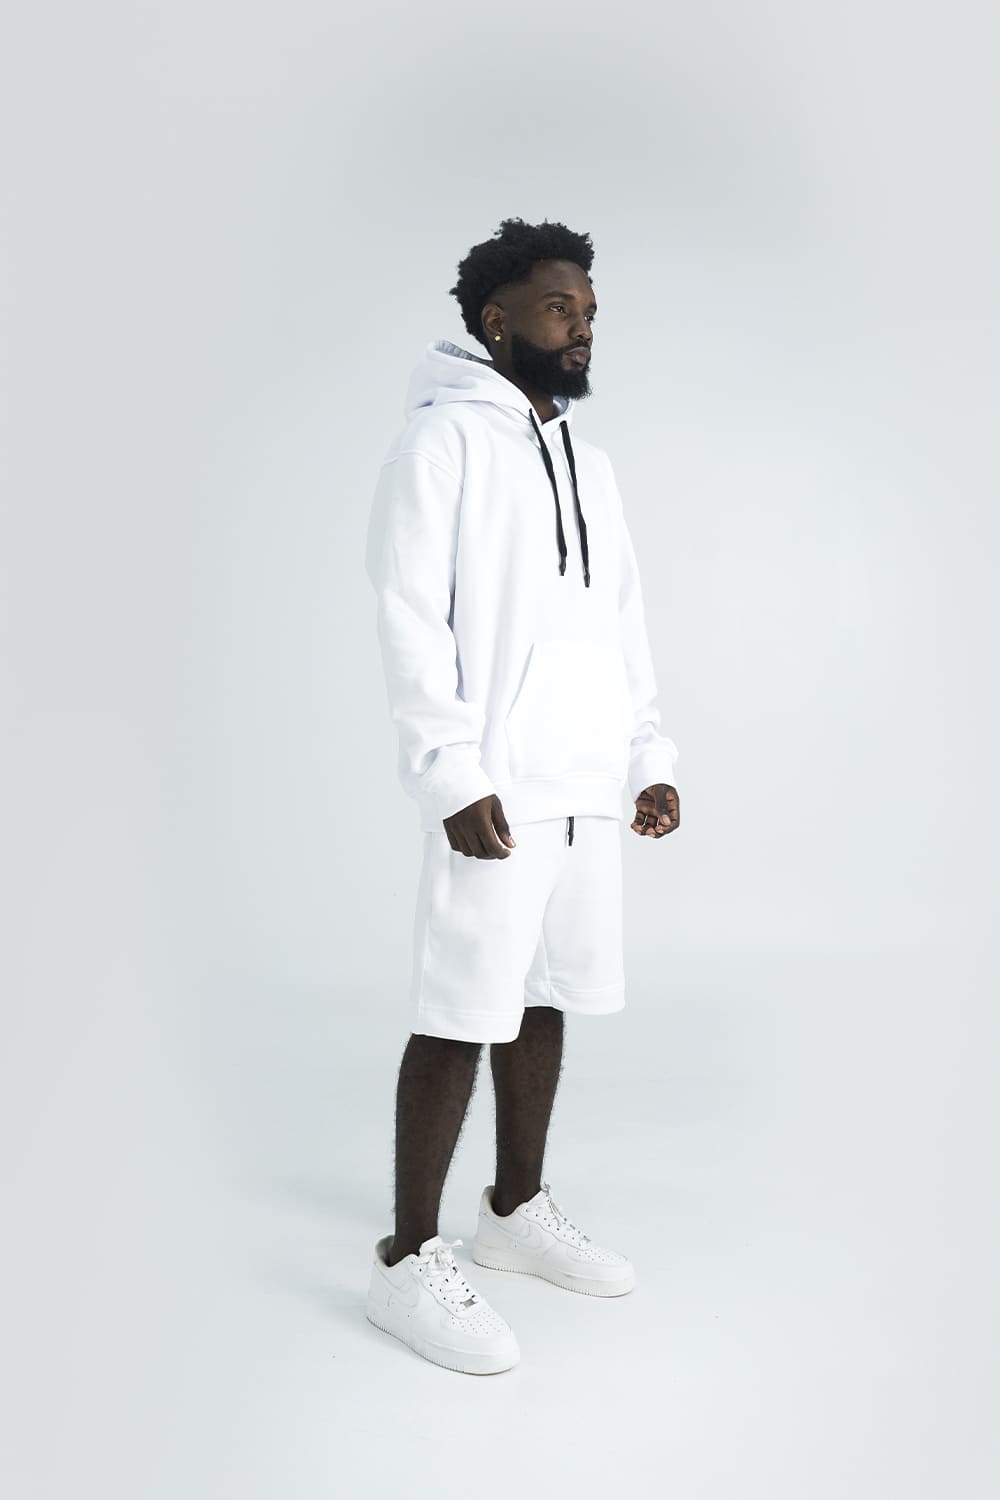 BCO 2.0 Classic Hoodie - WHITE 8315